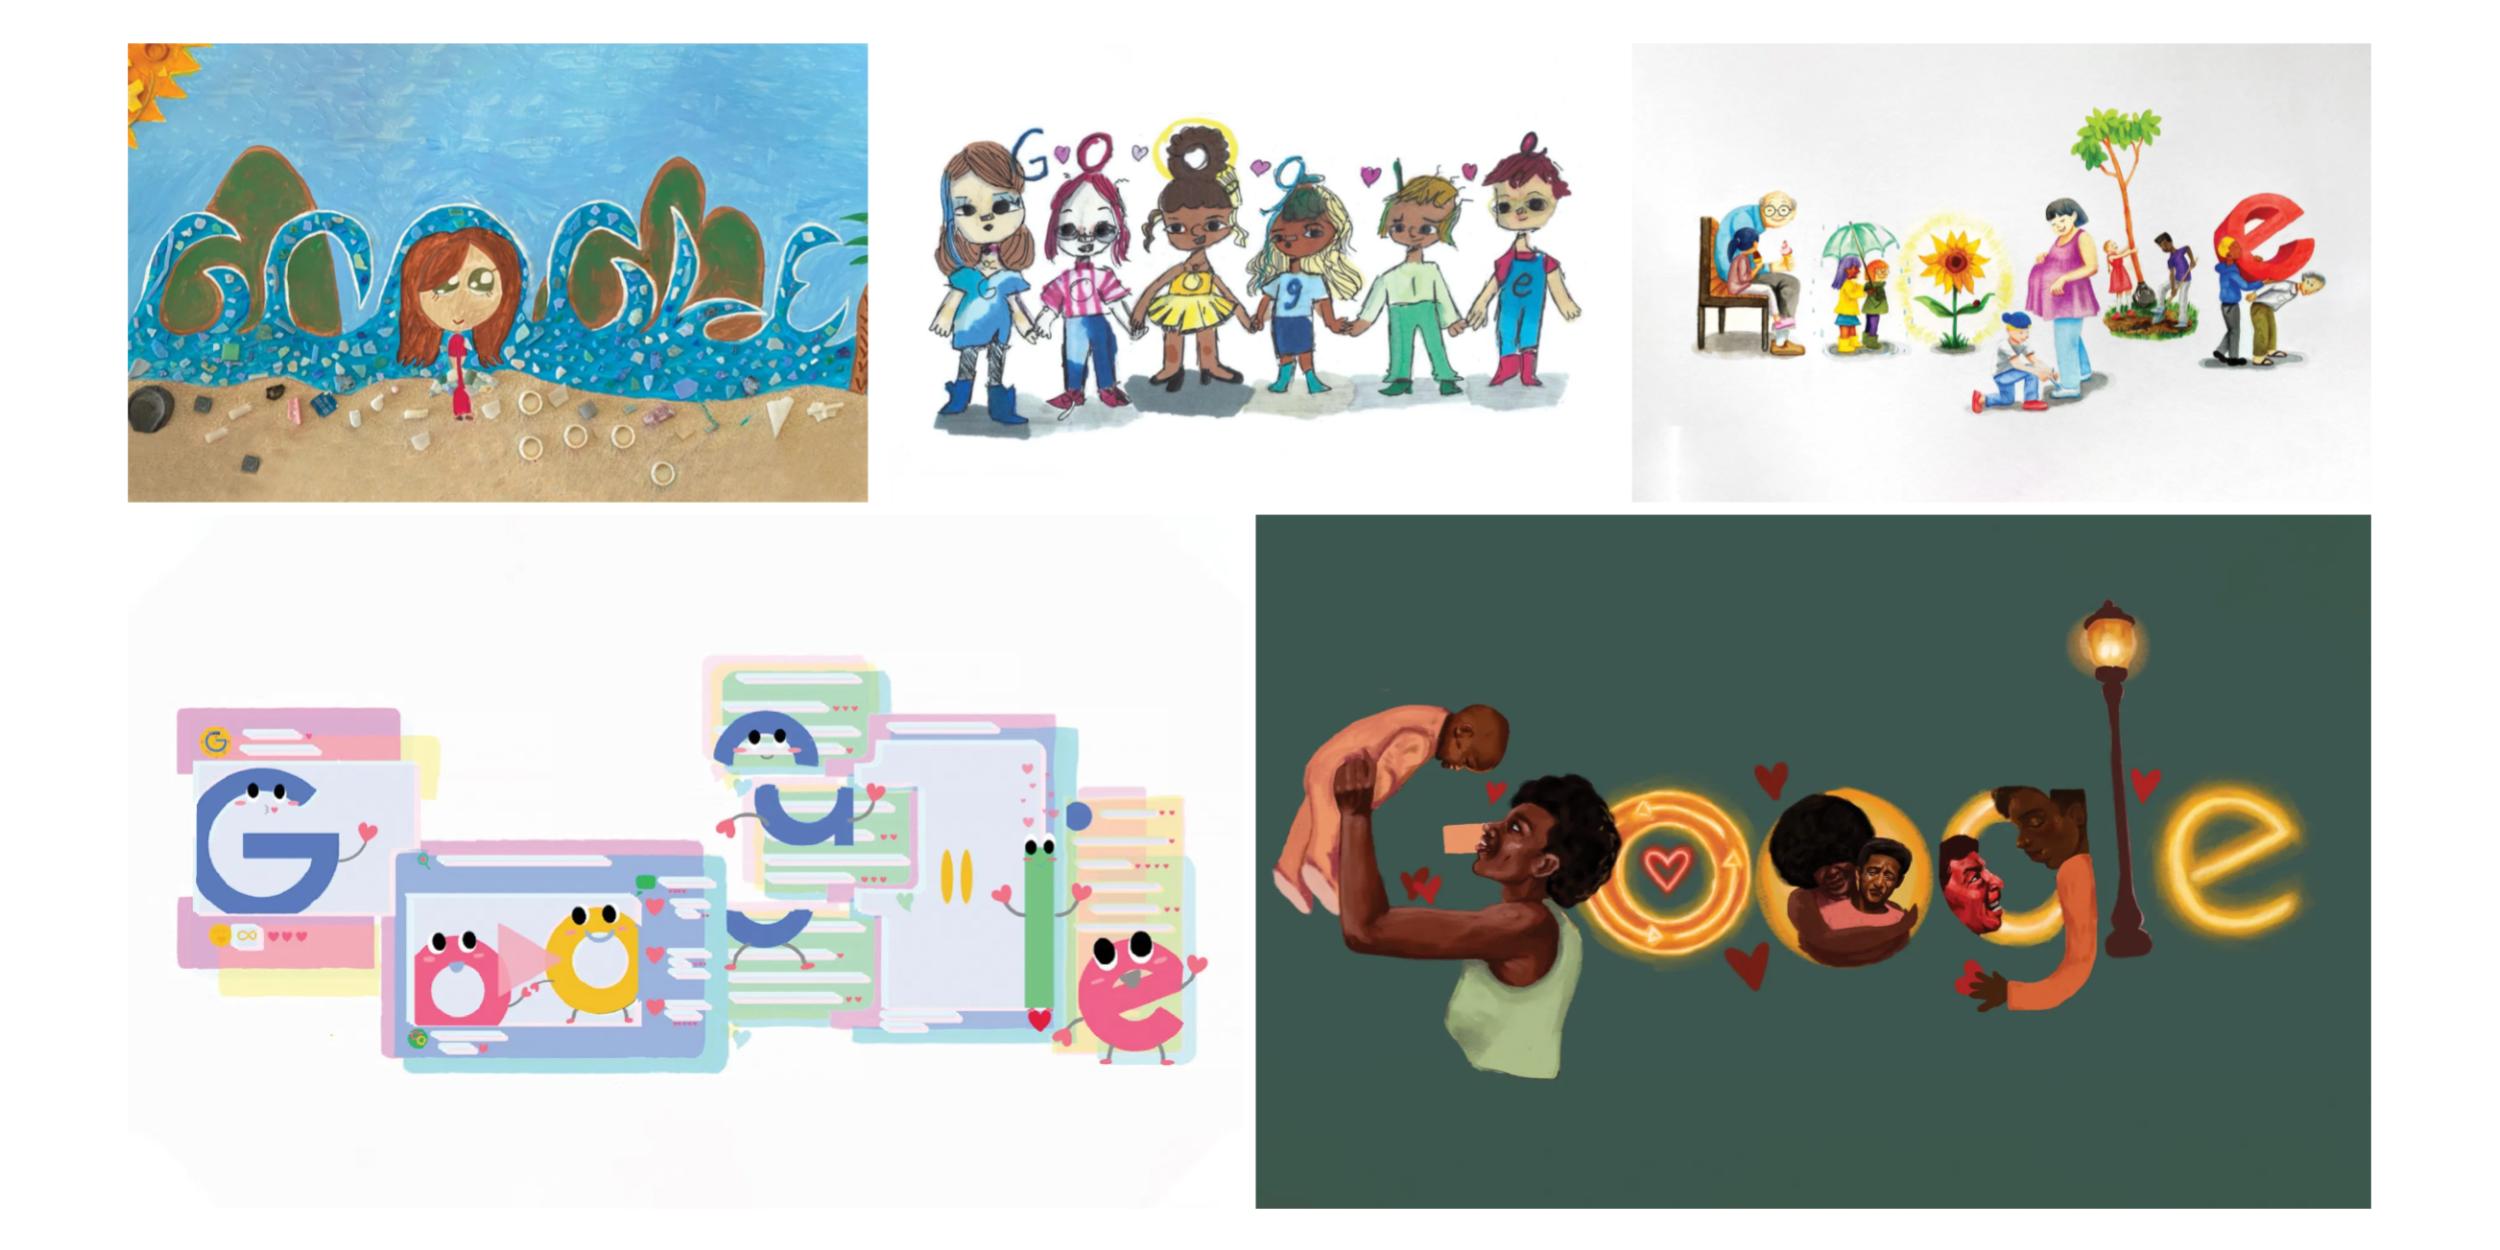 Doodle for Google 2020 national finalists selected [Gallery] 9to5Google